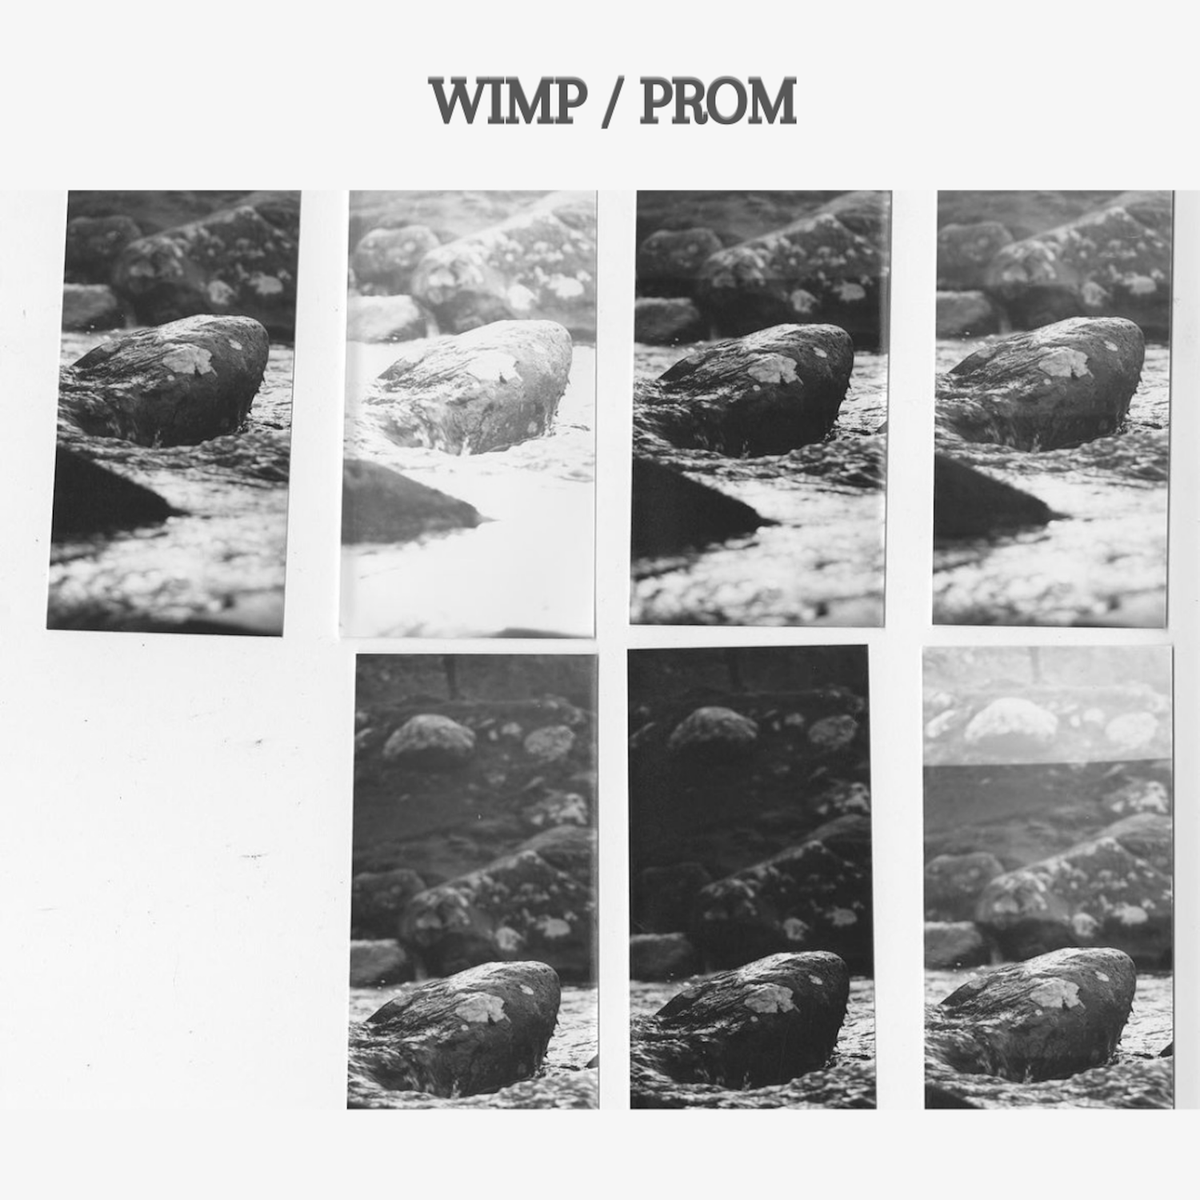 Very excited to be releasing the upcoming Wimp x prom split digitally on the 7th June. It rips. Pre-save it here: li.sten.to/wimp-prom Physical release from Virtue Tapes Artwork by Dampsoup